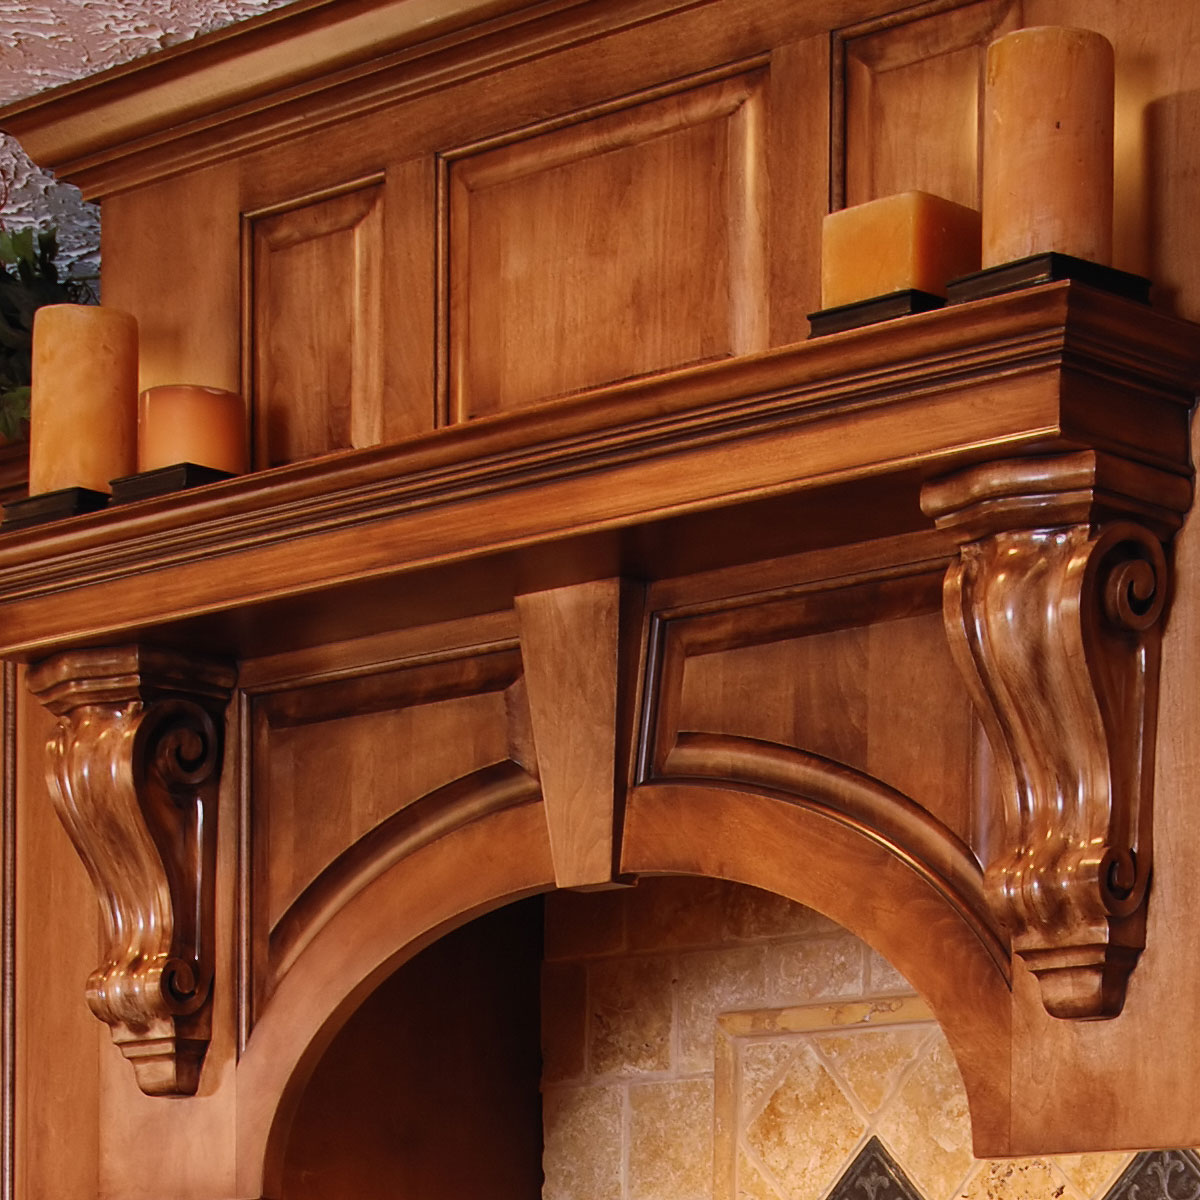 beautifulkitchen cabinets with classic clean line corbels